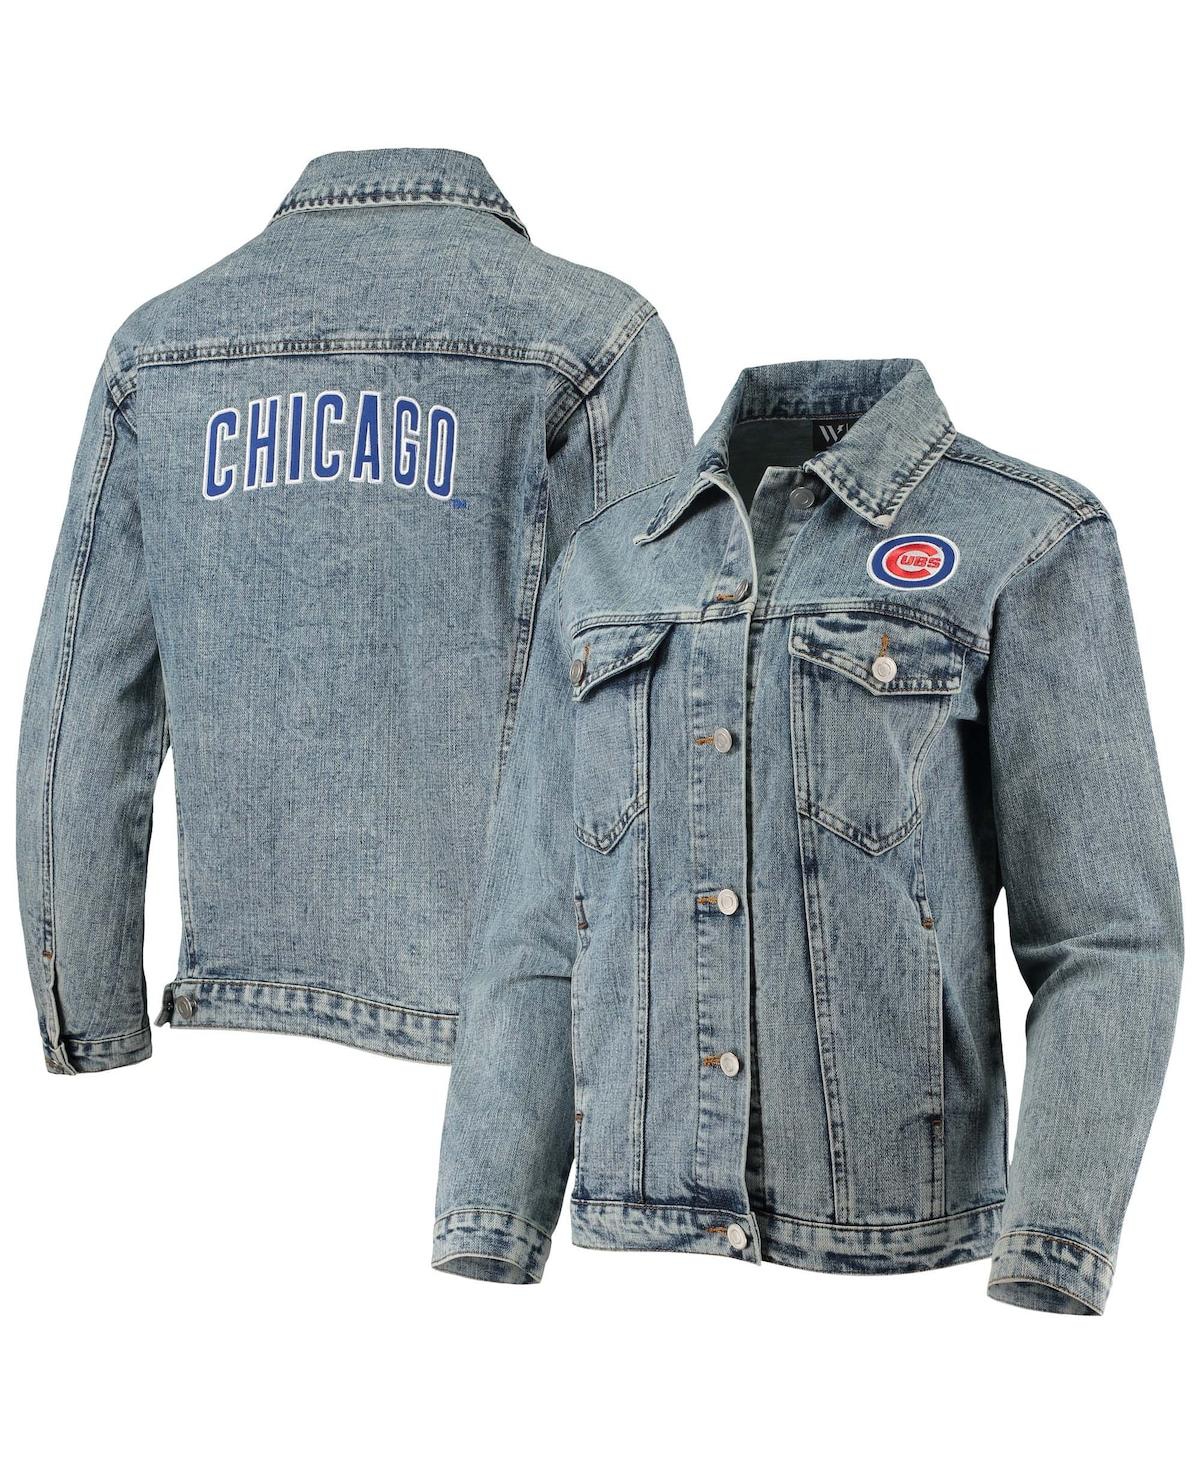 Women's The Wild Collective Chicago Cubs Team Patch Denim Button-Up Jacket - Blue